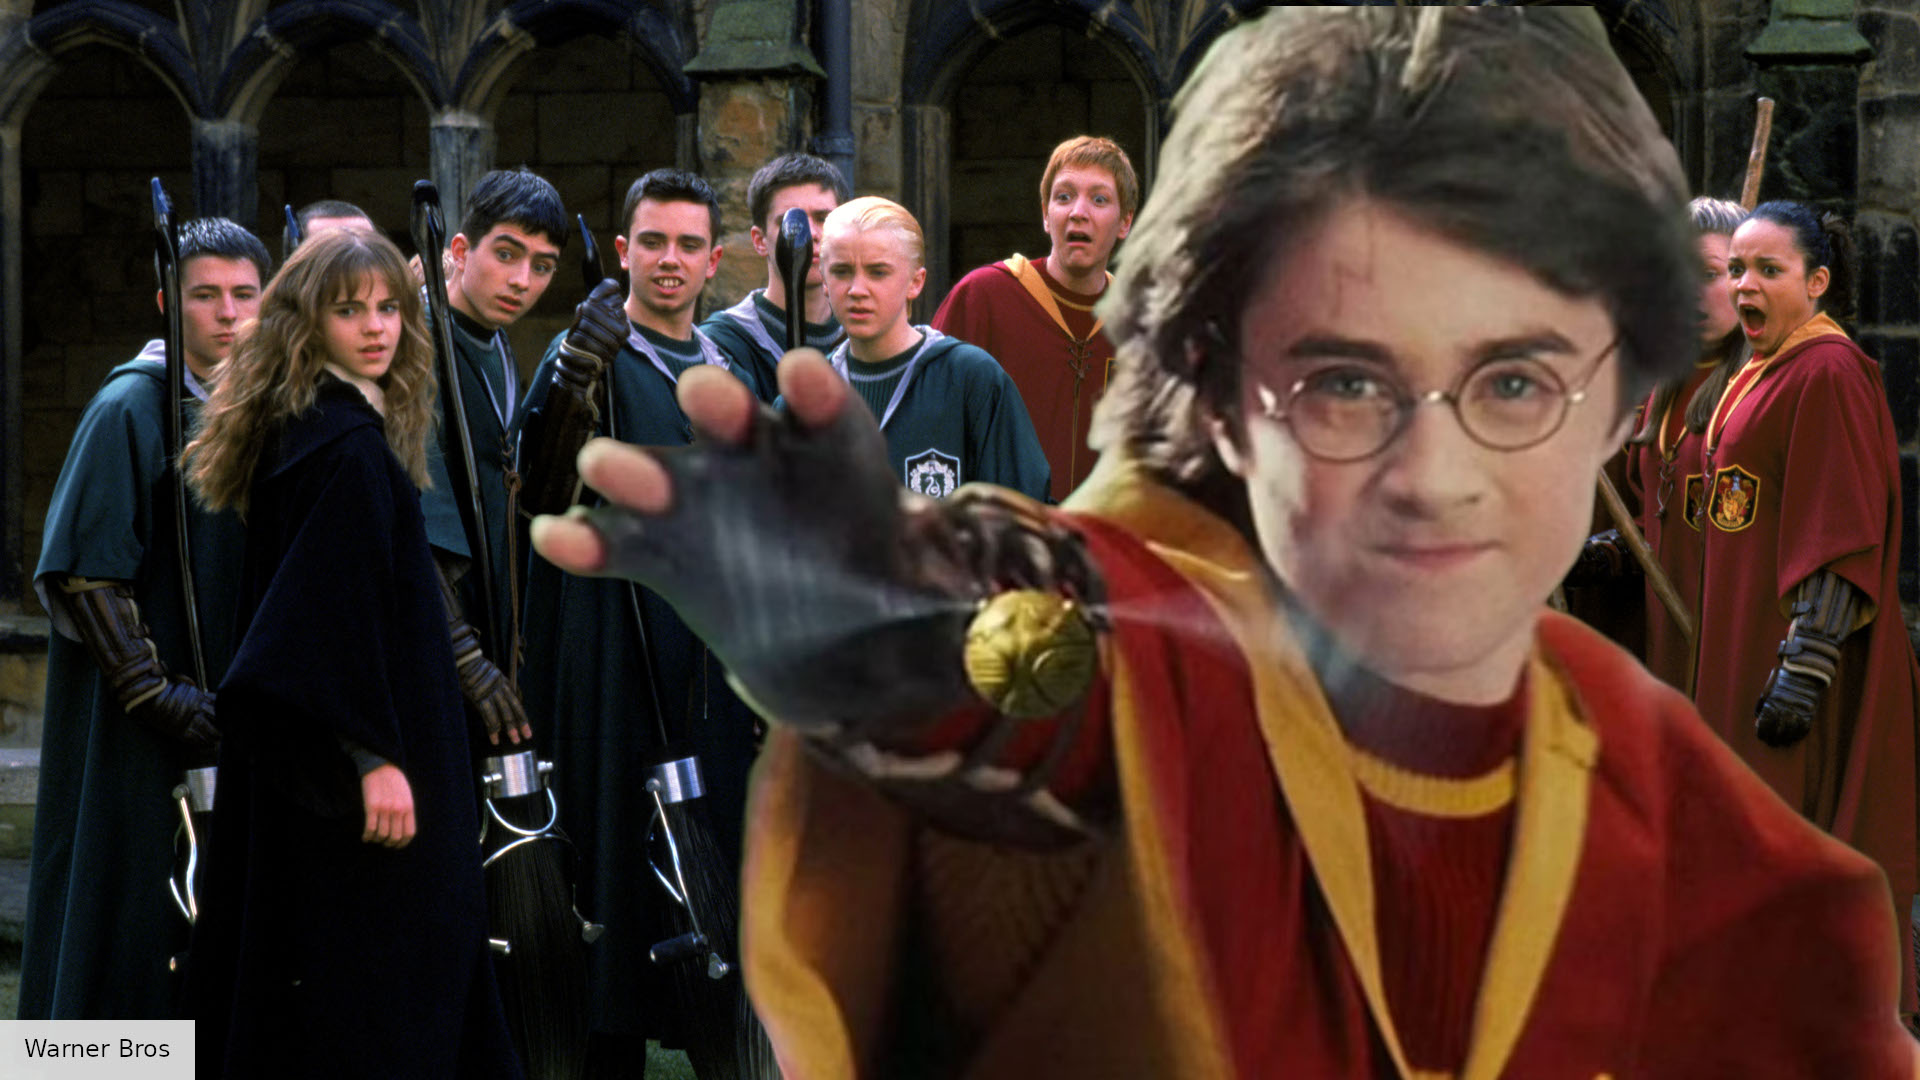 Harry Potter actually had a really disappointing Quidditch record